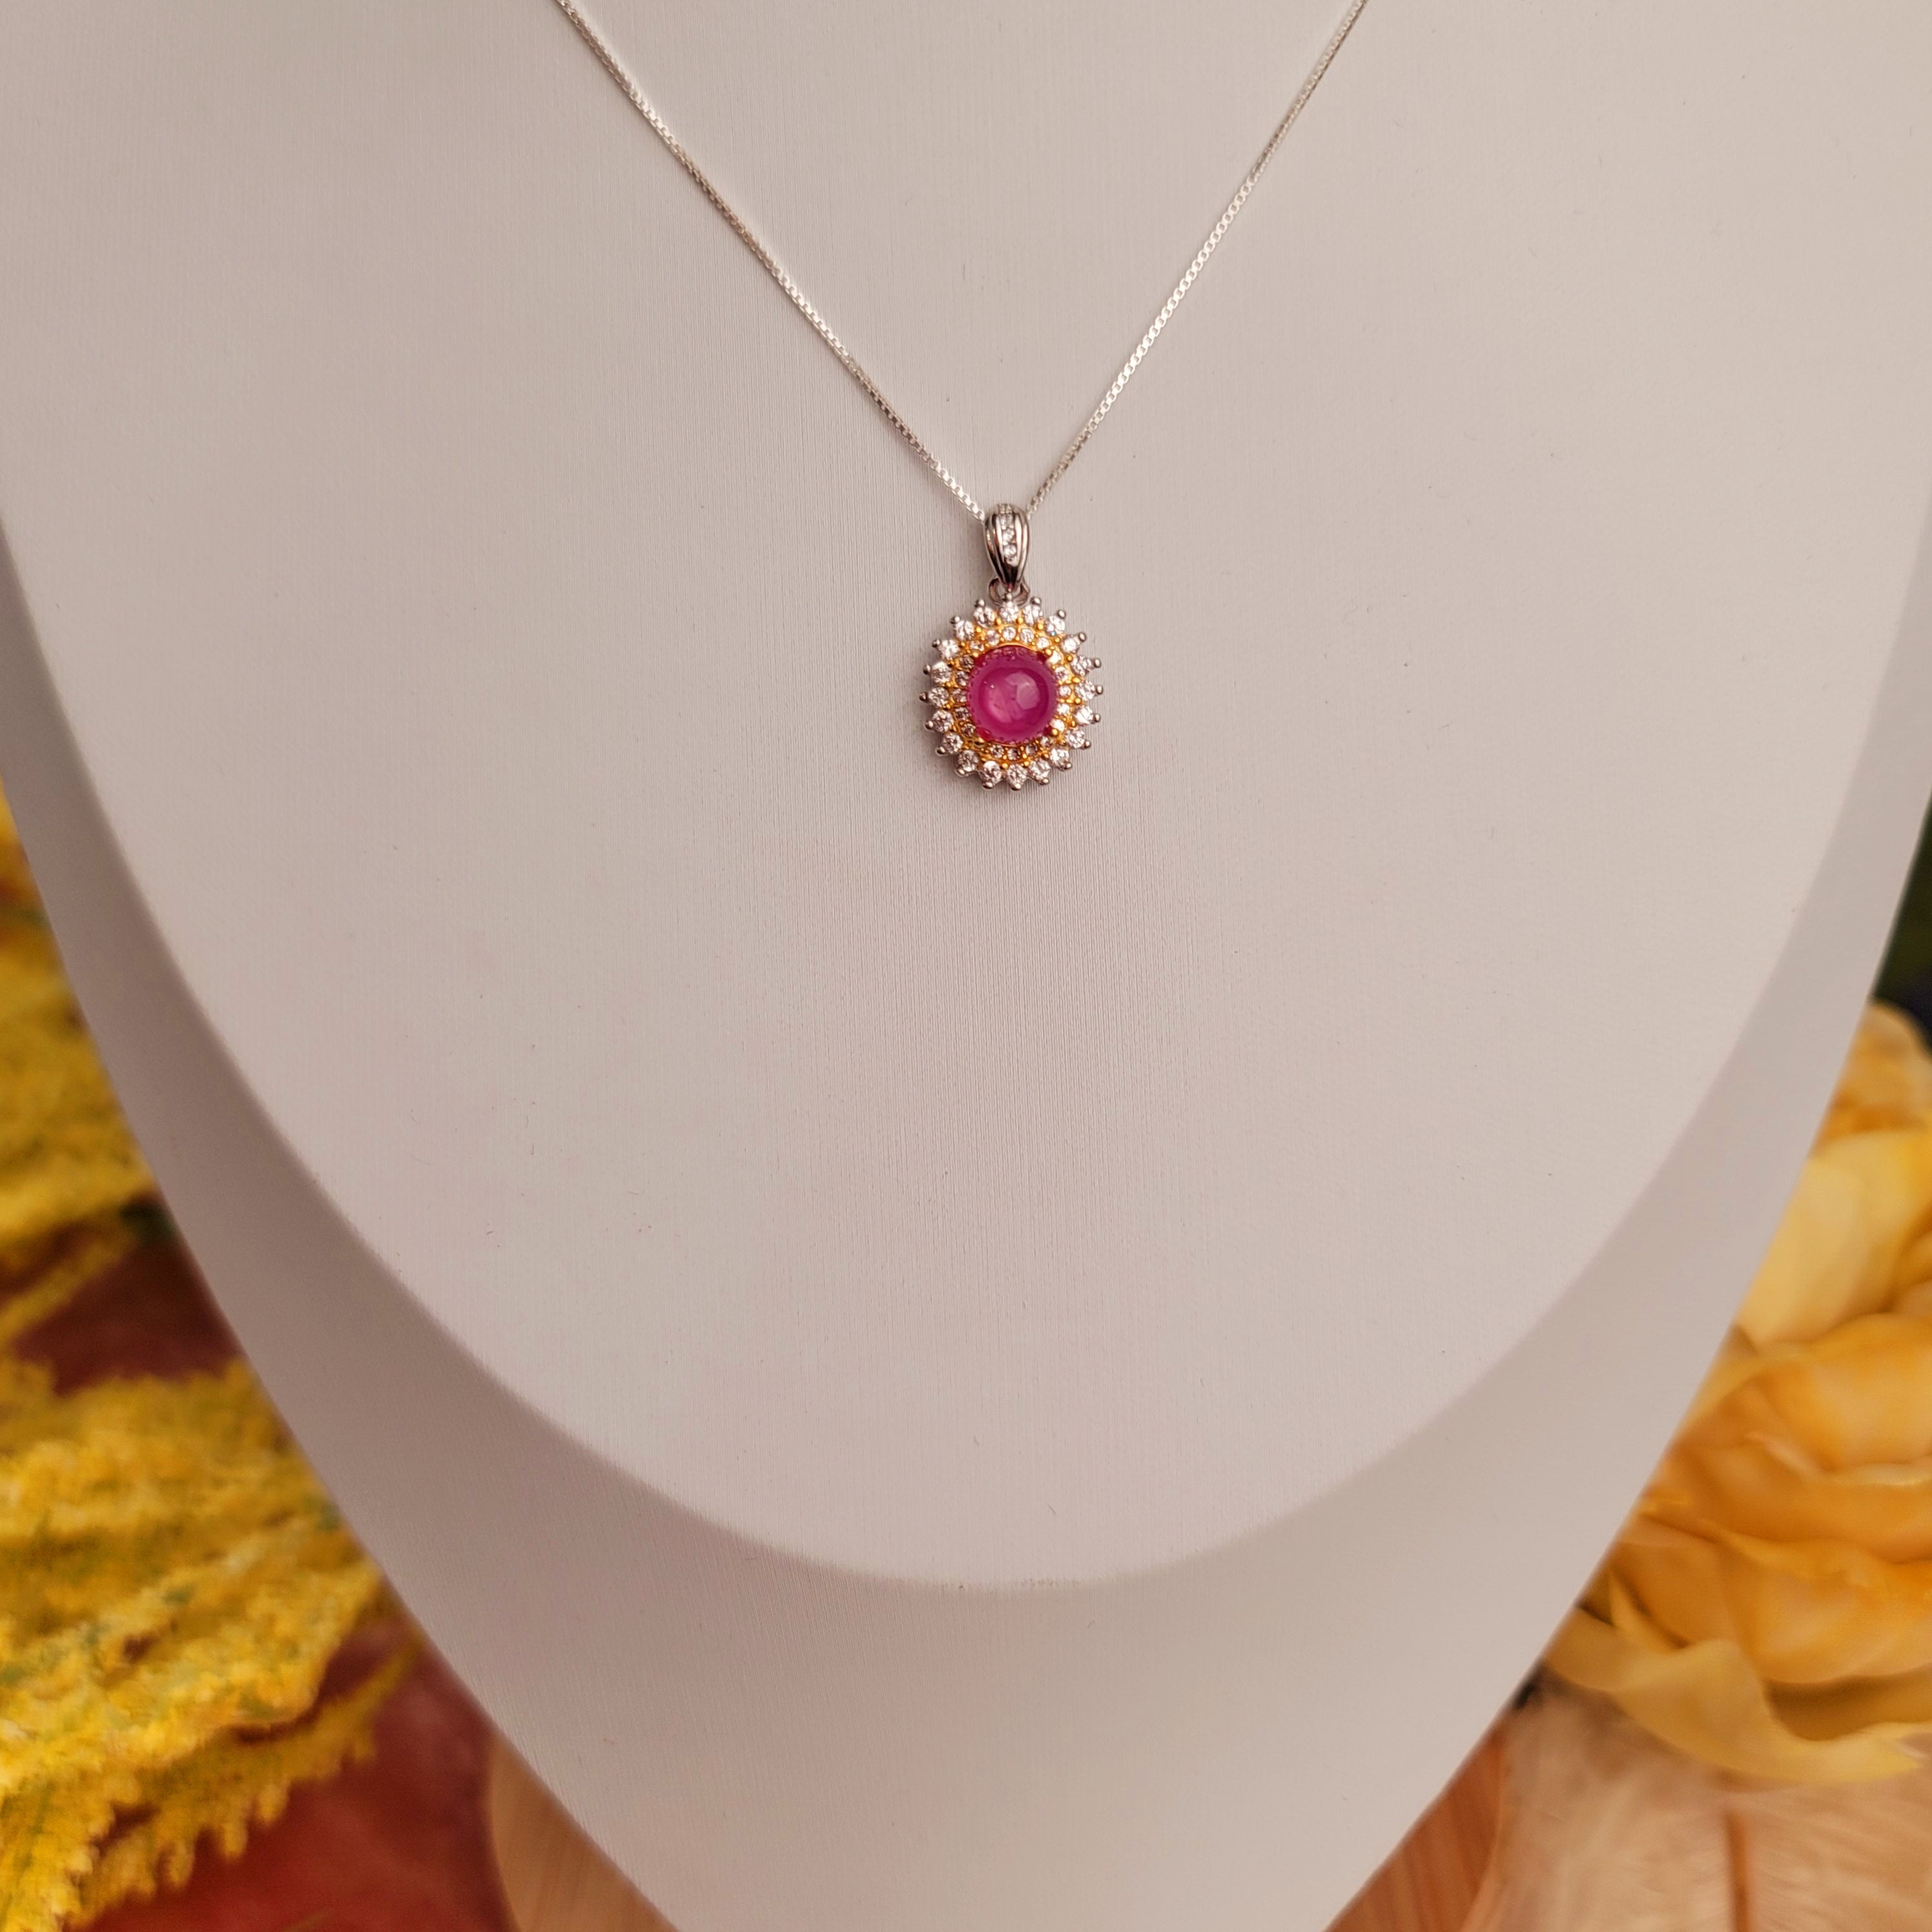 Star Ruby Necklace for Attraction, Love and Passion